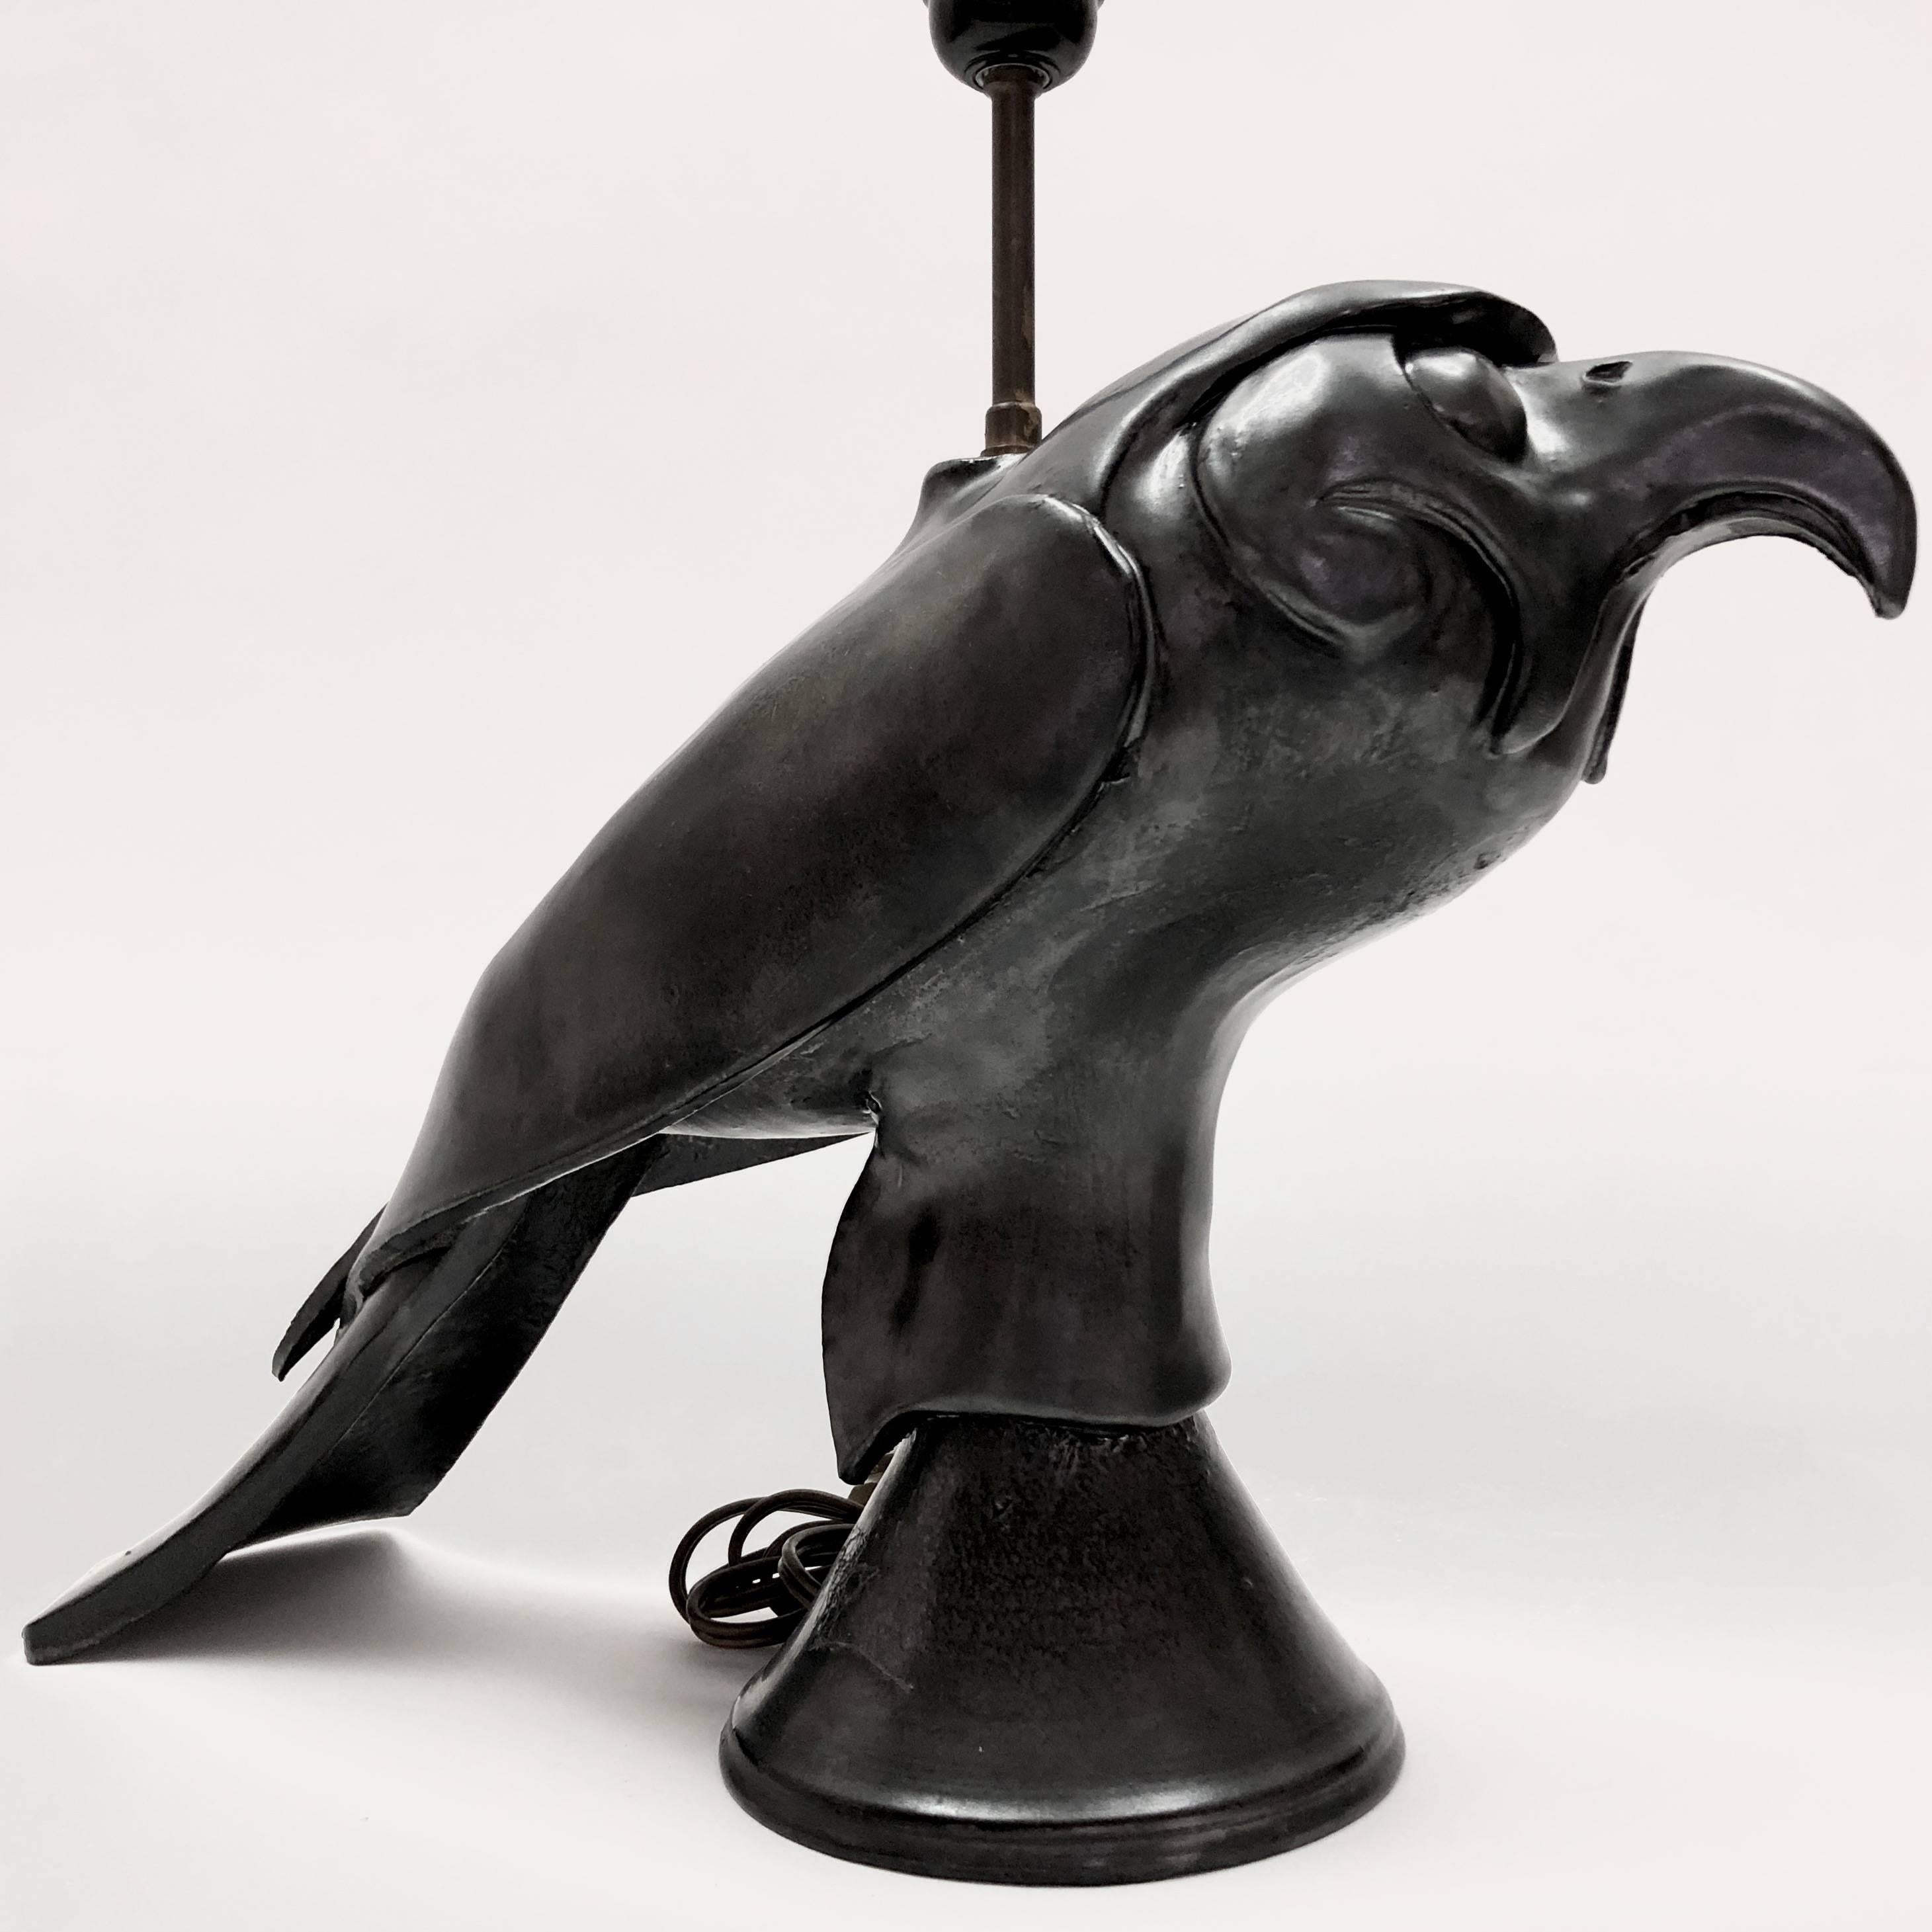 Large ceramic sculpture, forming a bird lamp (owl ? crow ?) glazed in black.
Mid-20th century handmade piece, designed by an unknown artist. 
The piece is signed. 

Height measurement concerns the ceramic sculpture only and is without the